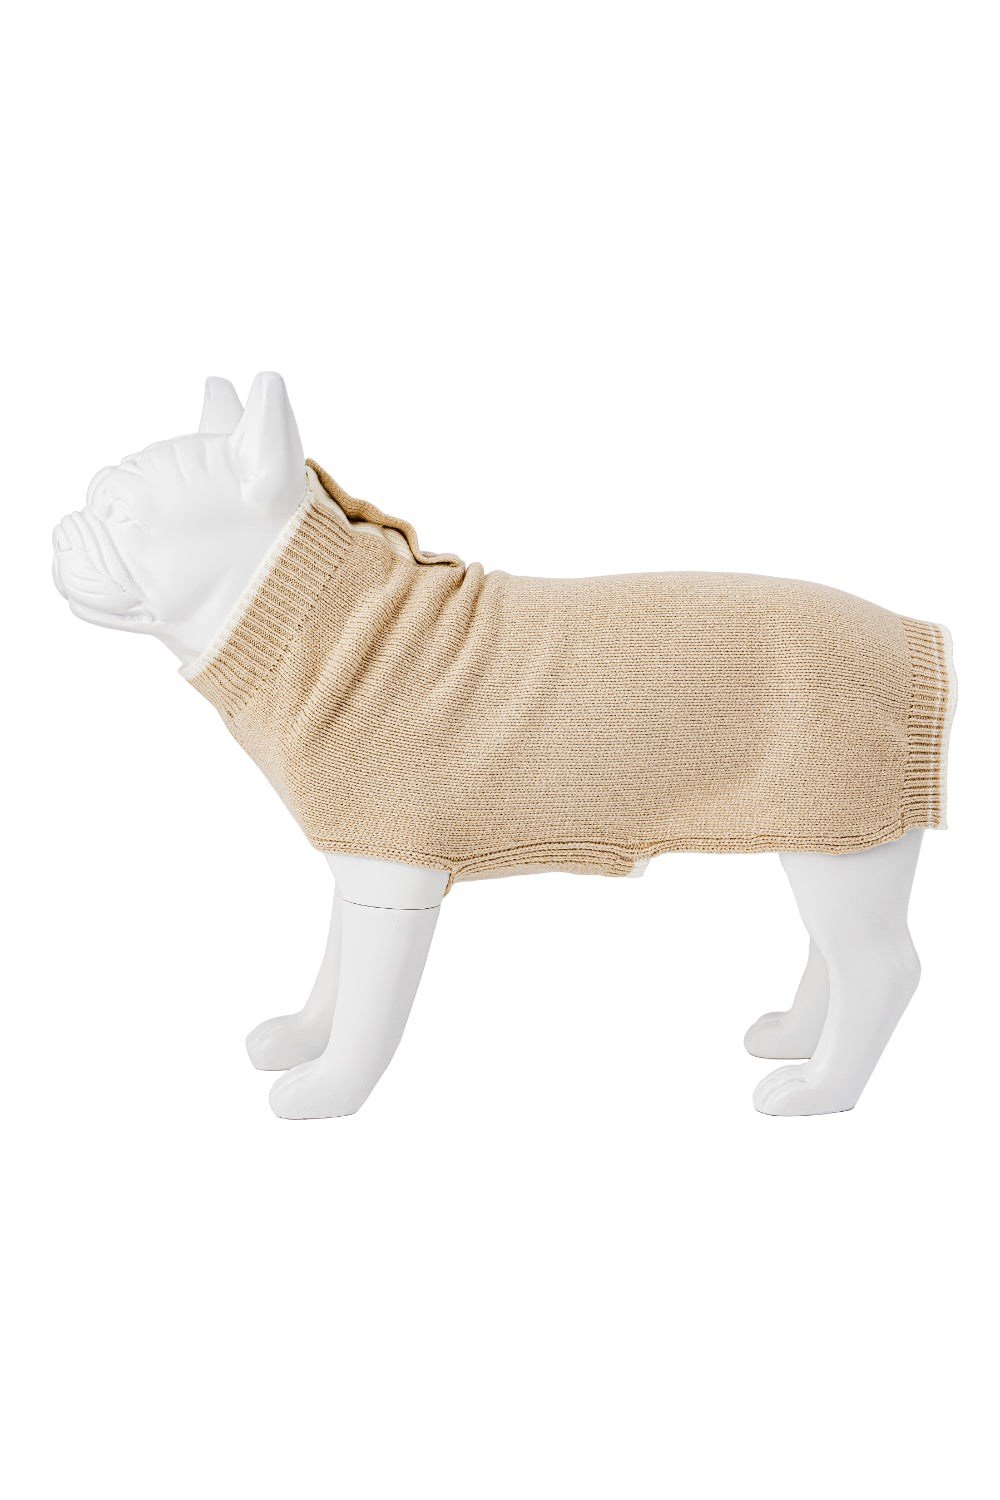 Knitted Dog Jumper Sweater -